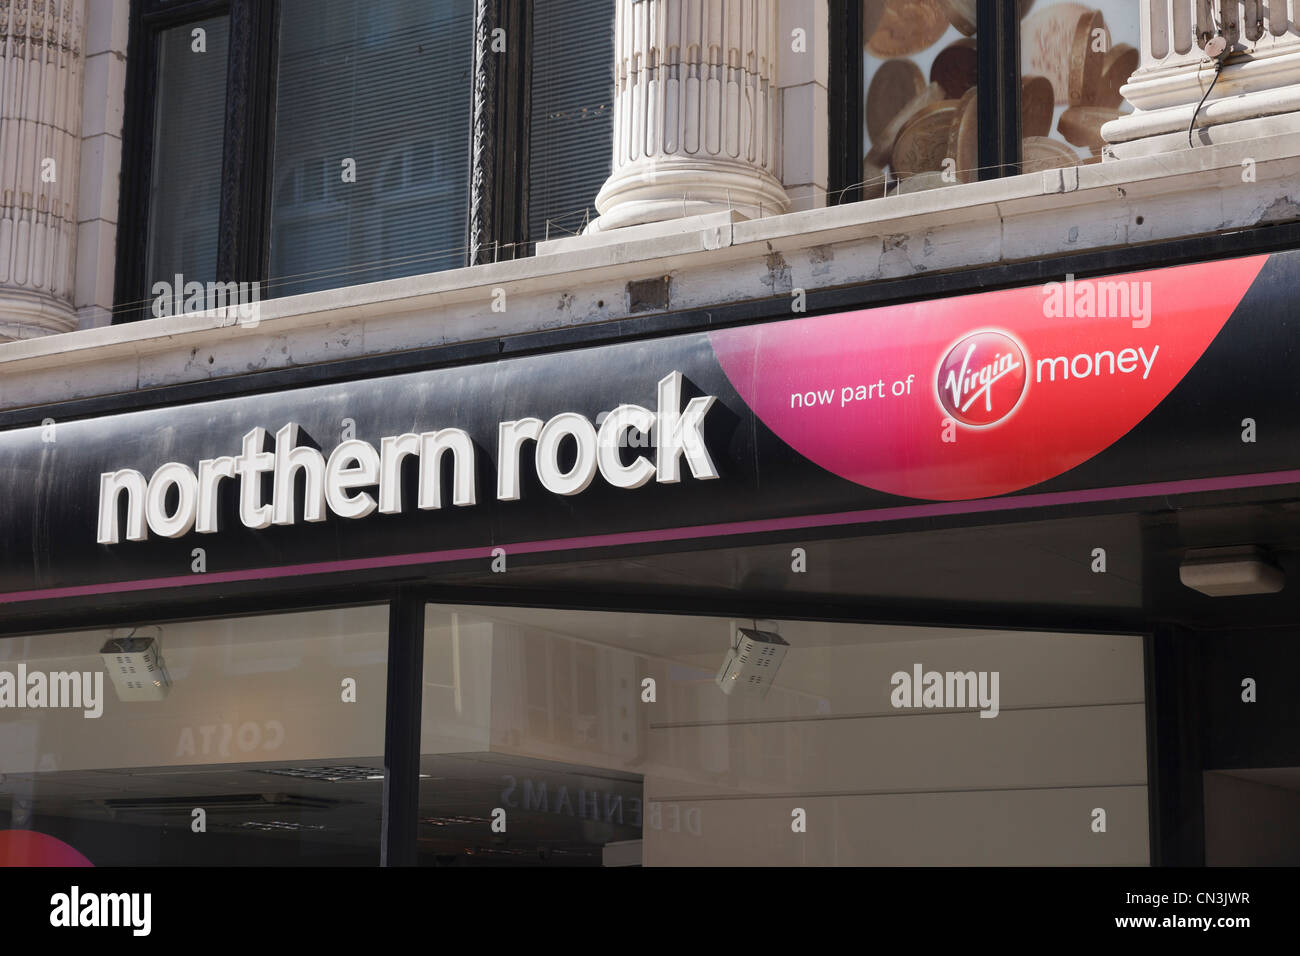 Northern Rock building society and Virgin Money bank branch sign. Yorkshire, England, UK, Britain. Stock Photo